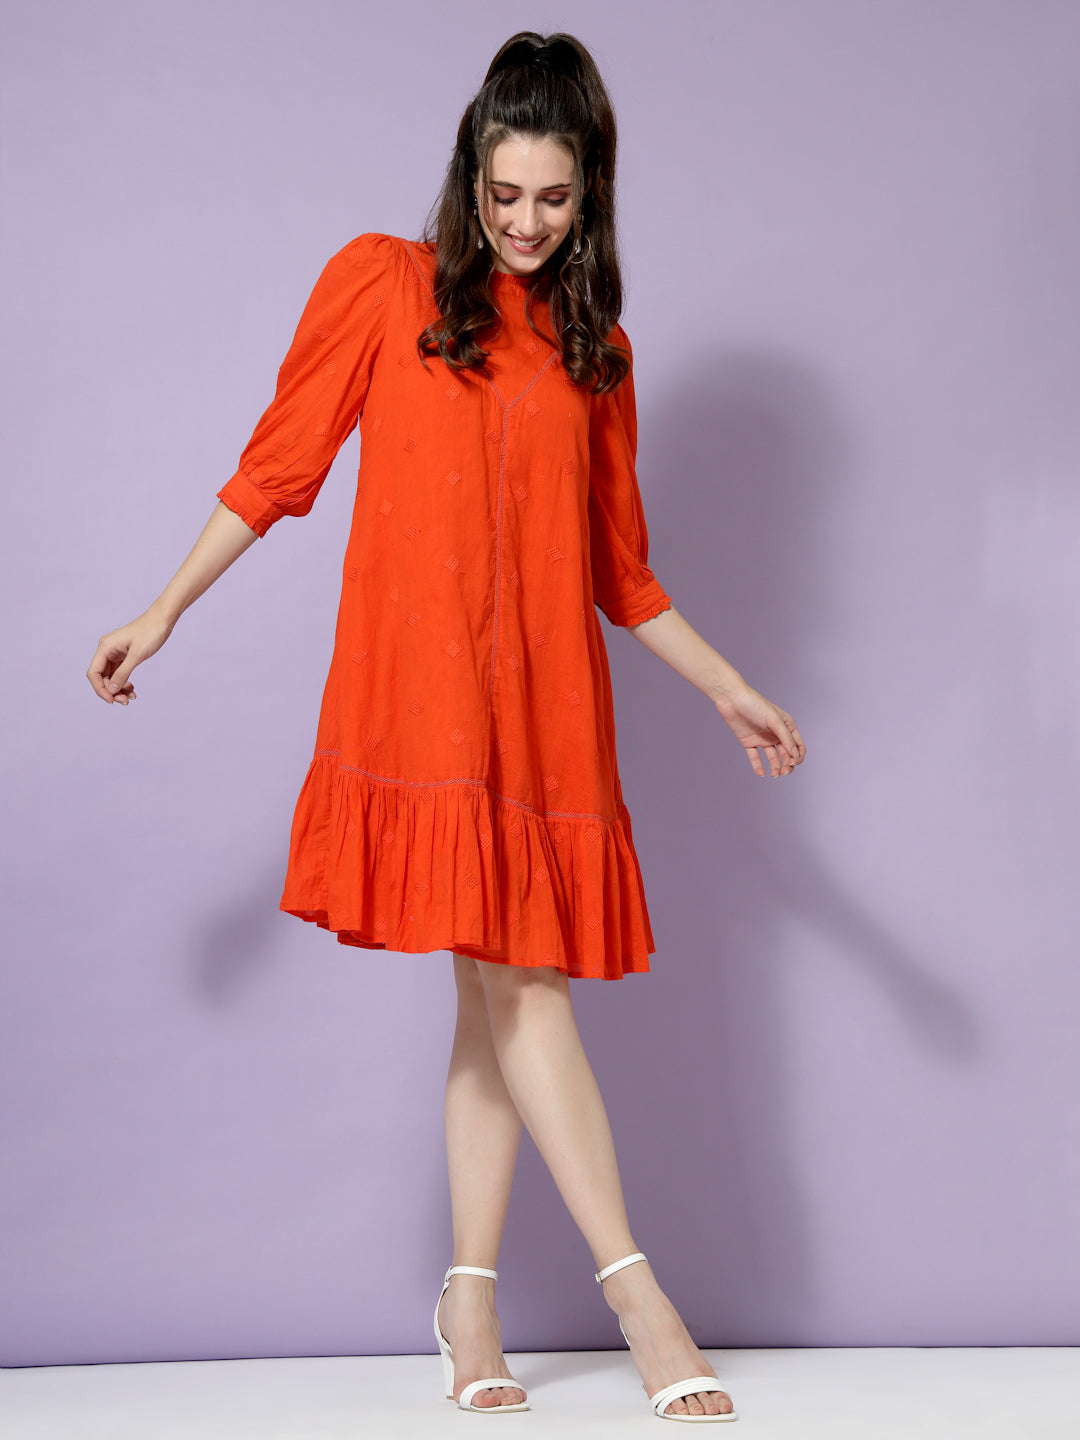 Terquois Stylish A-line Casual Dress Emblished with Lace and Has Ruffle Round Neck Dresses TERQUOIS S Orange 